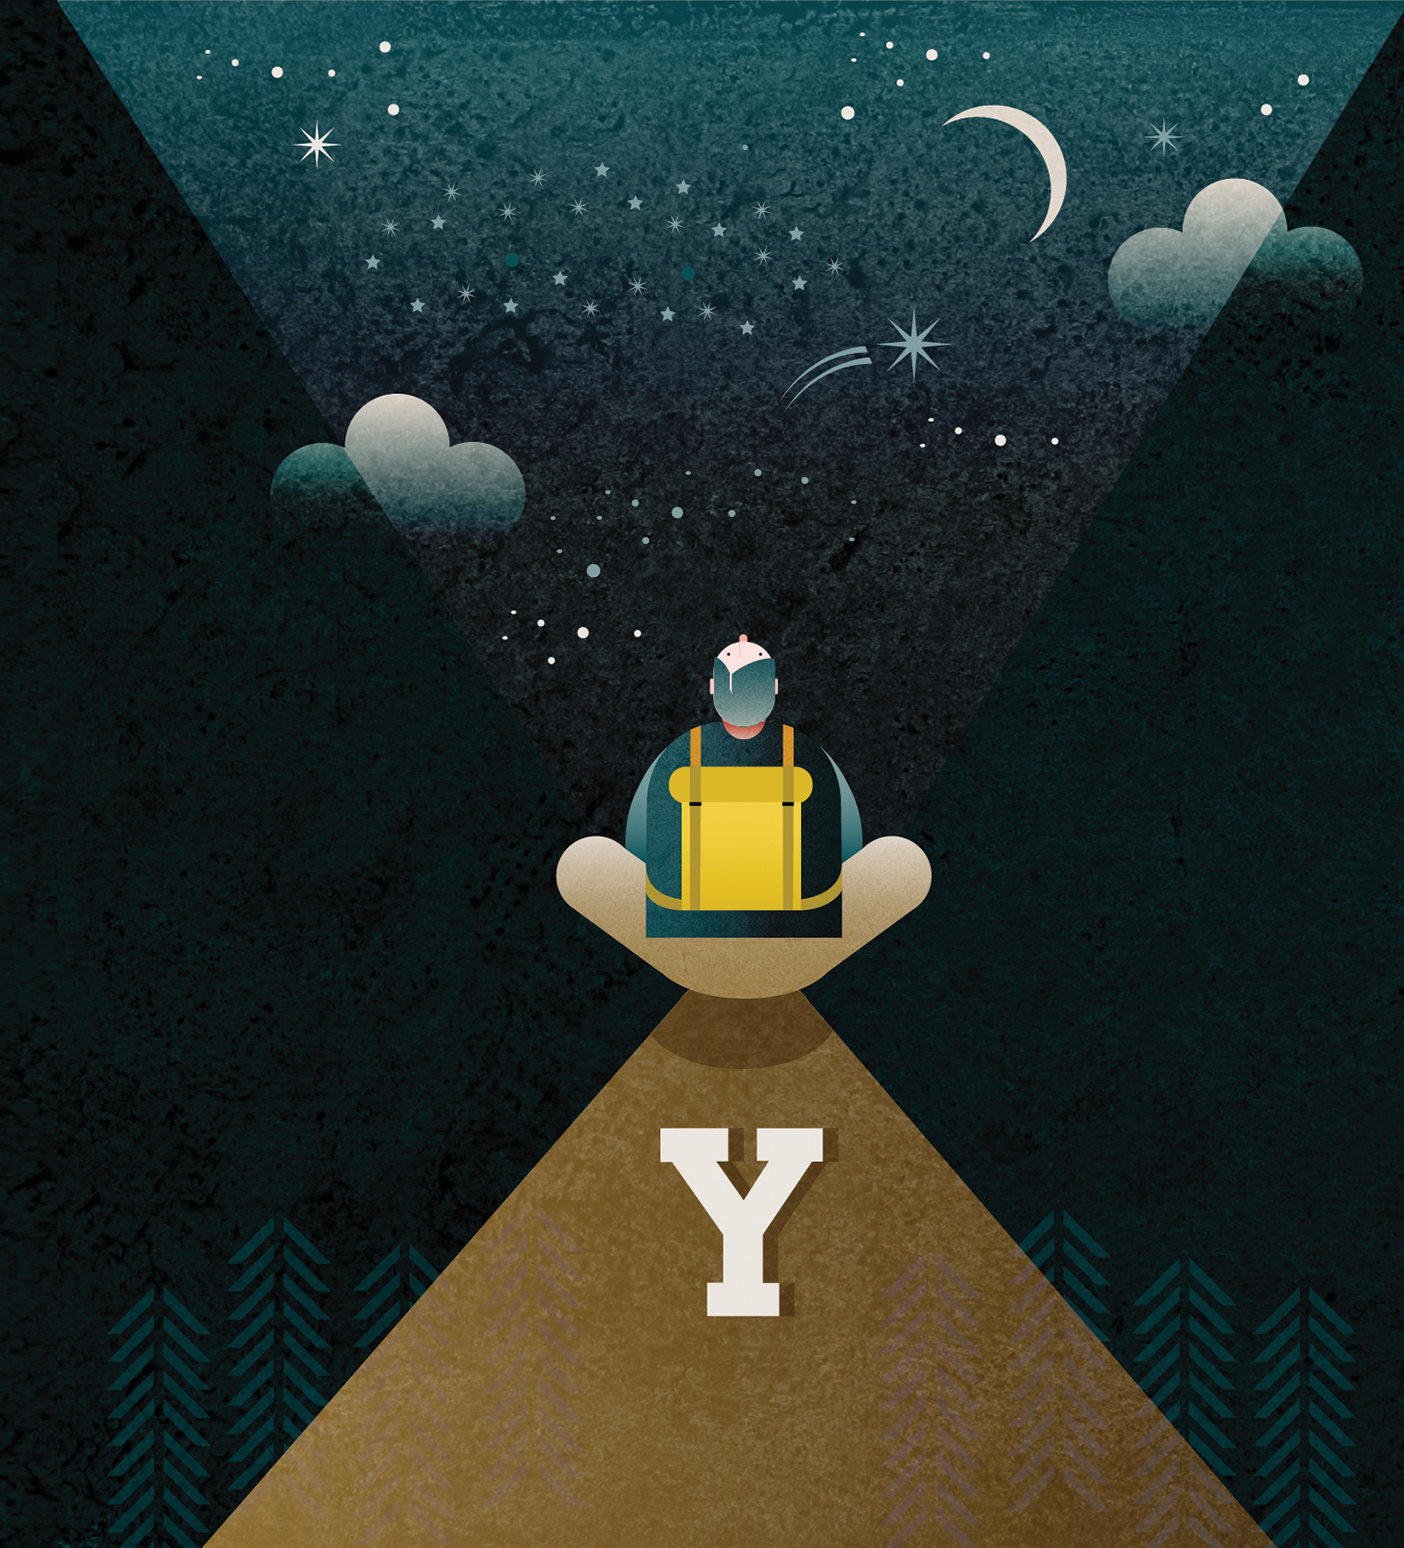 Illustration of a student sitting on a mountain top and viewing the night sky.